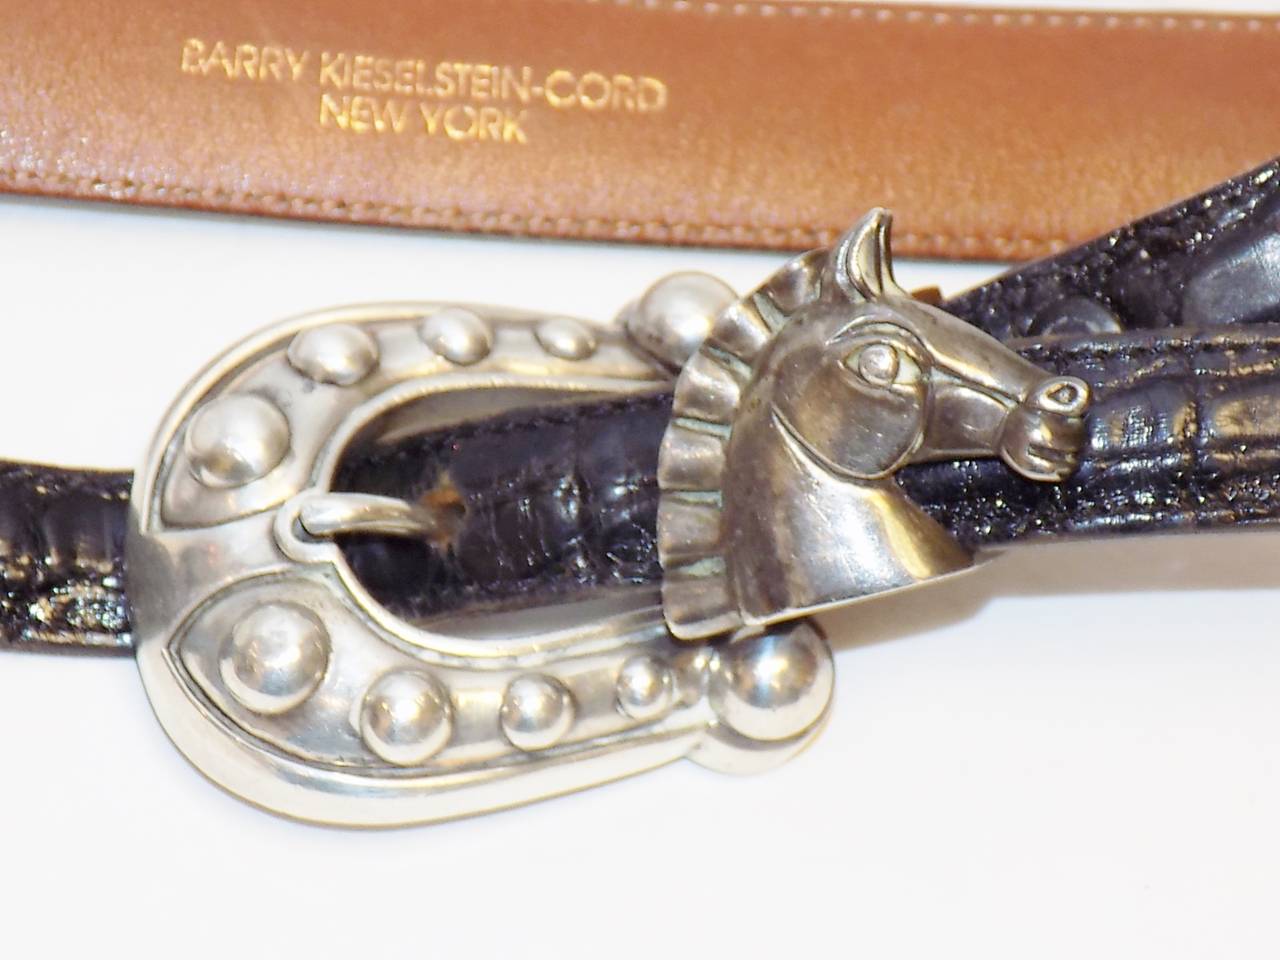 Very beautiful unisex  Barry Kieselstein Cord Sterling Silver  Horse Head belt buckle; adjustable size Large belt, measures appox. 42 long with holes at Last hole at 36 inches. Buckle measures 2.13